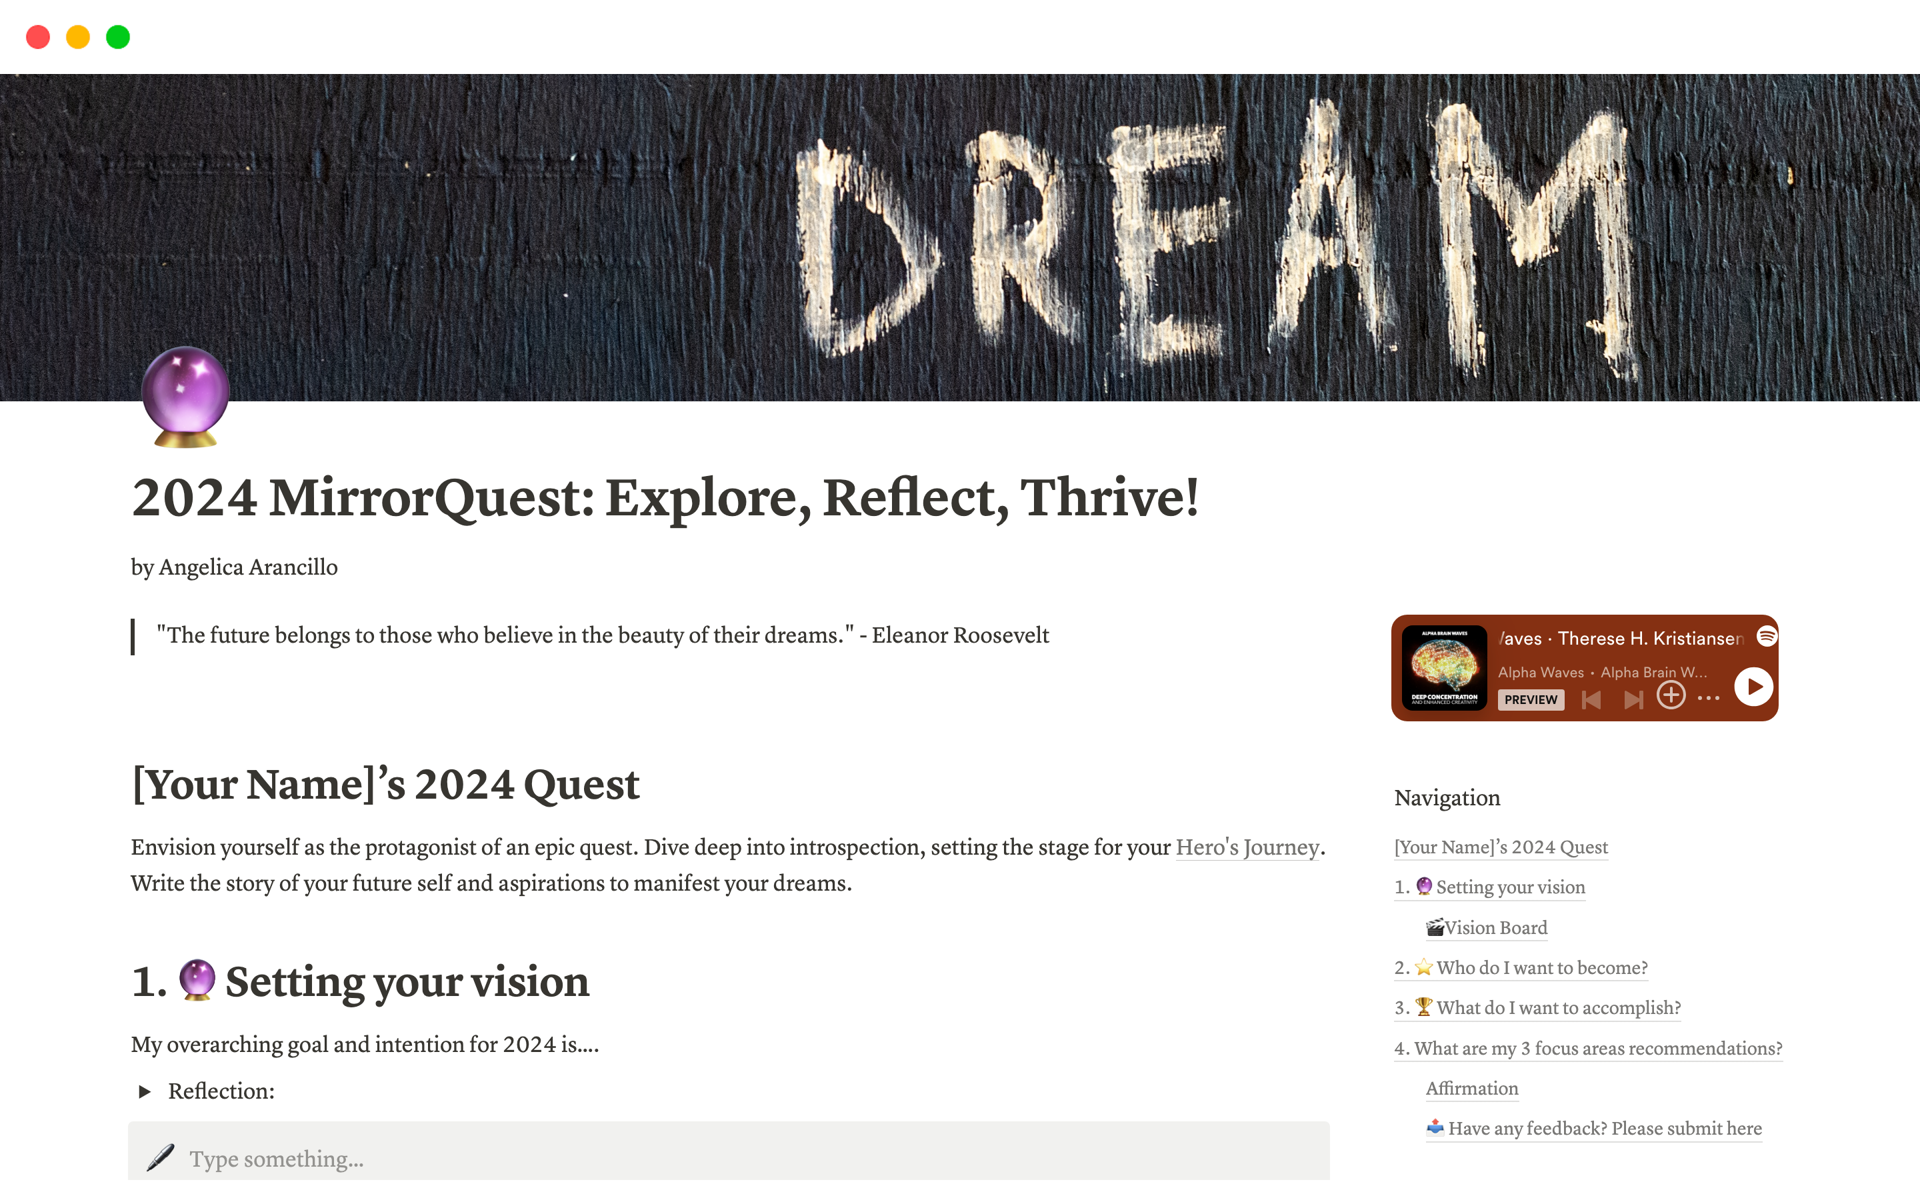 A template preview for 2024 MirrorQuest: Explore, Reflect, Thrive!